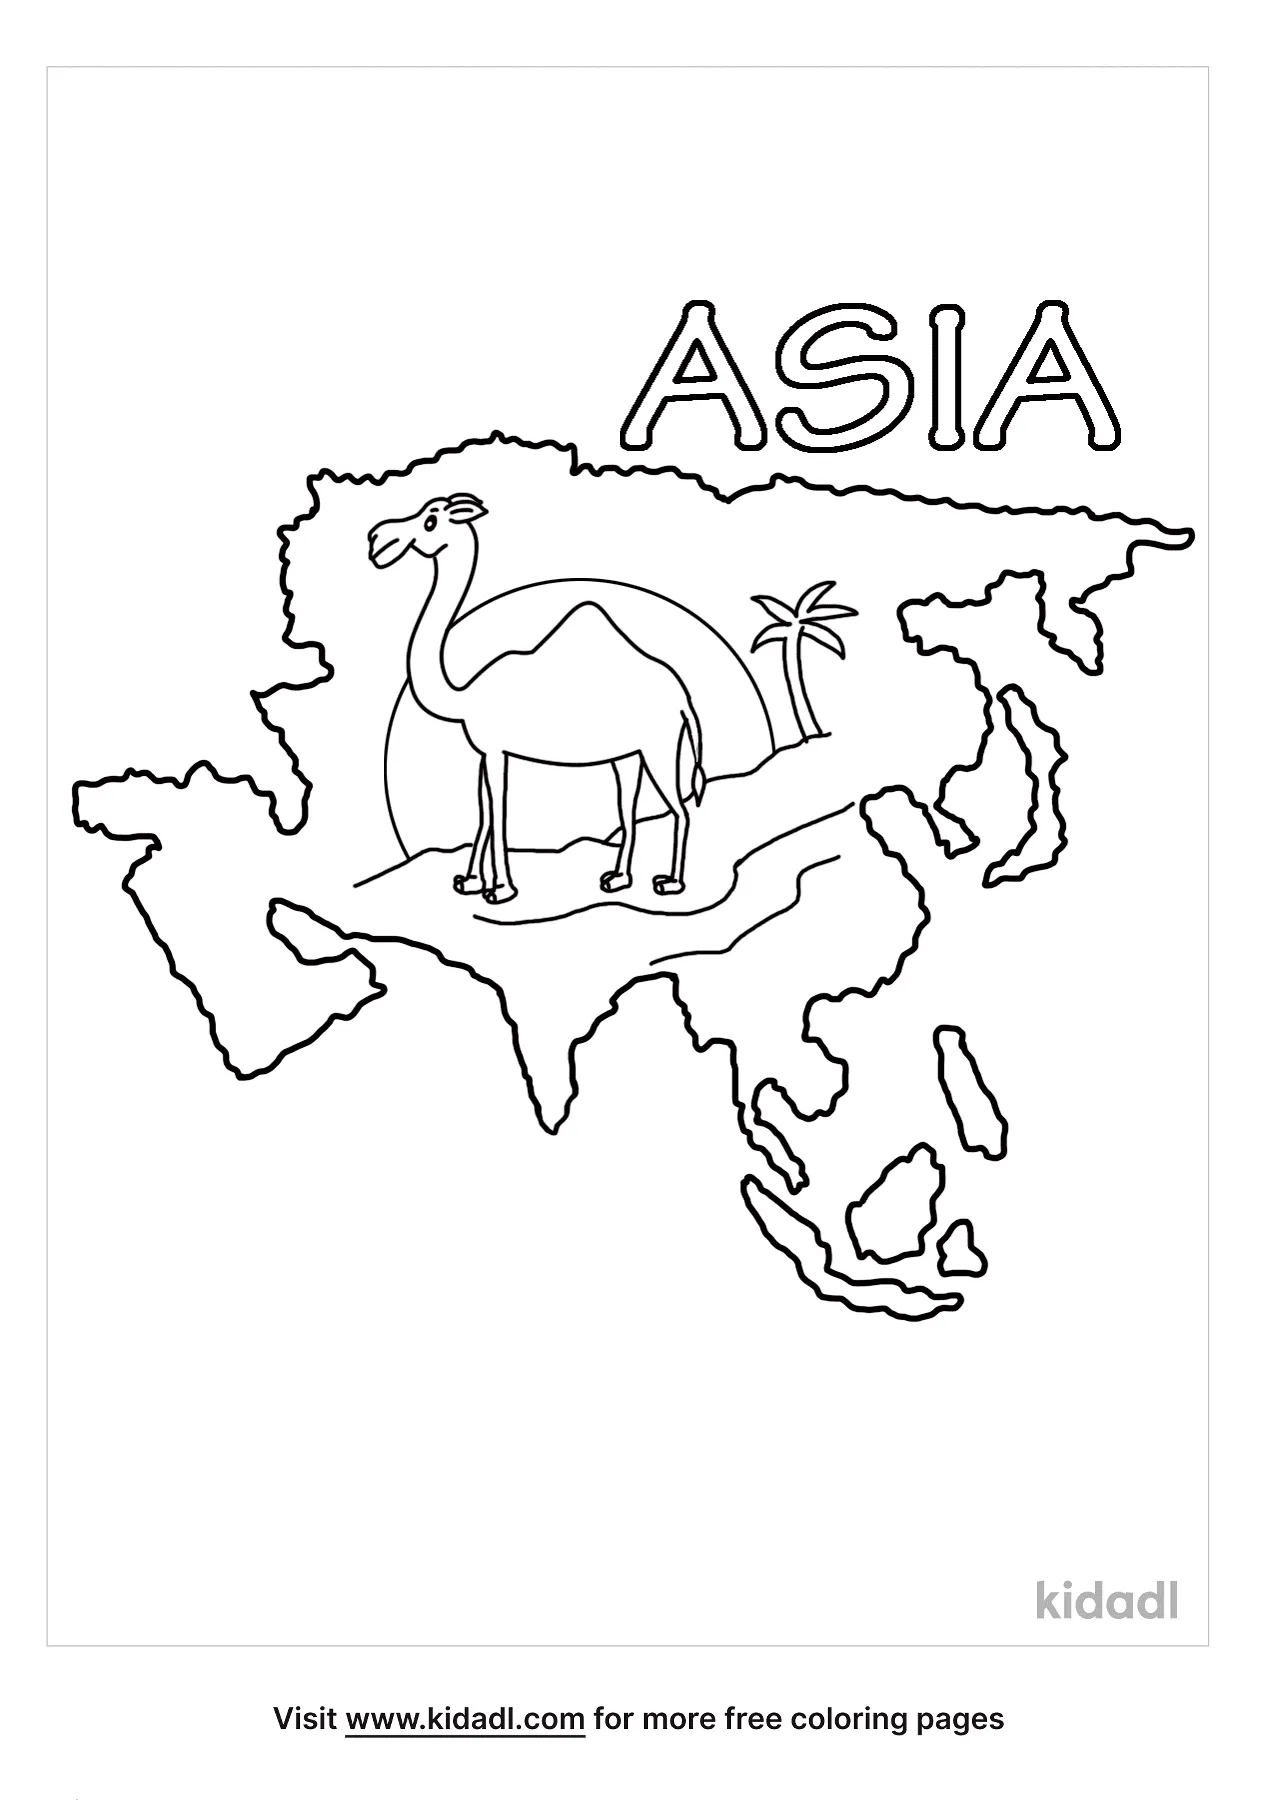 Asia Coloring Pages   Free Asia Coloring Pages   Kidadl